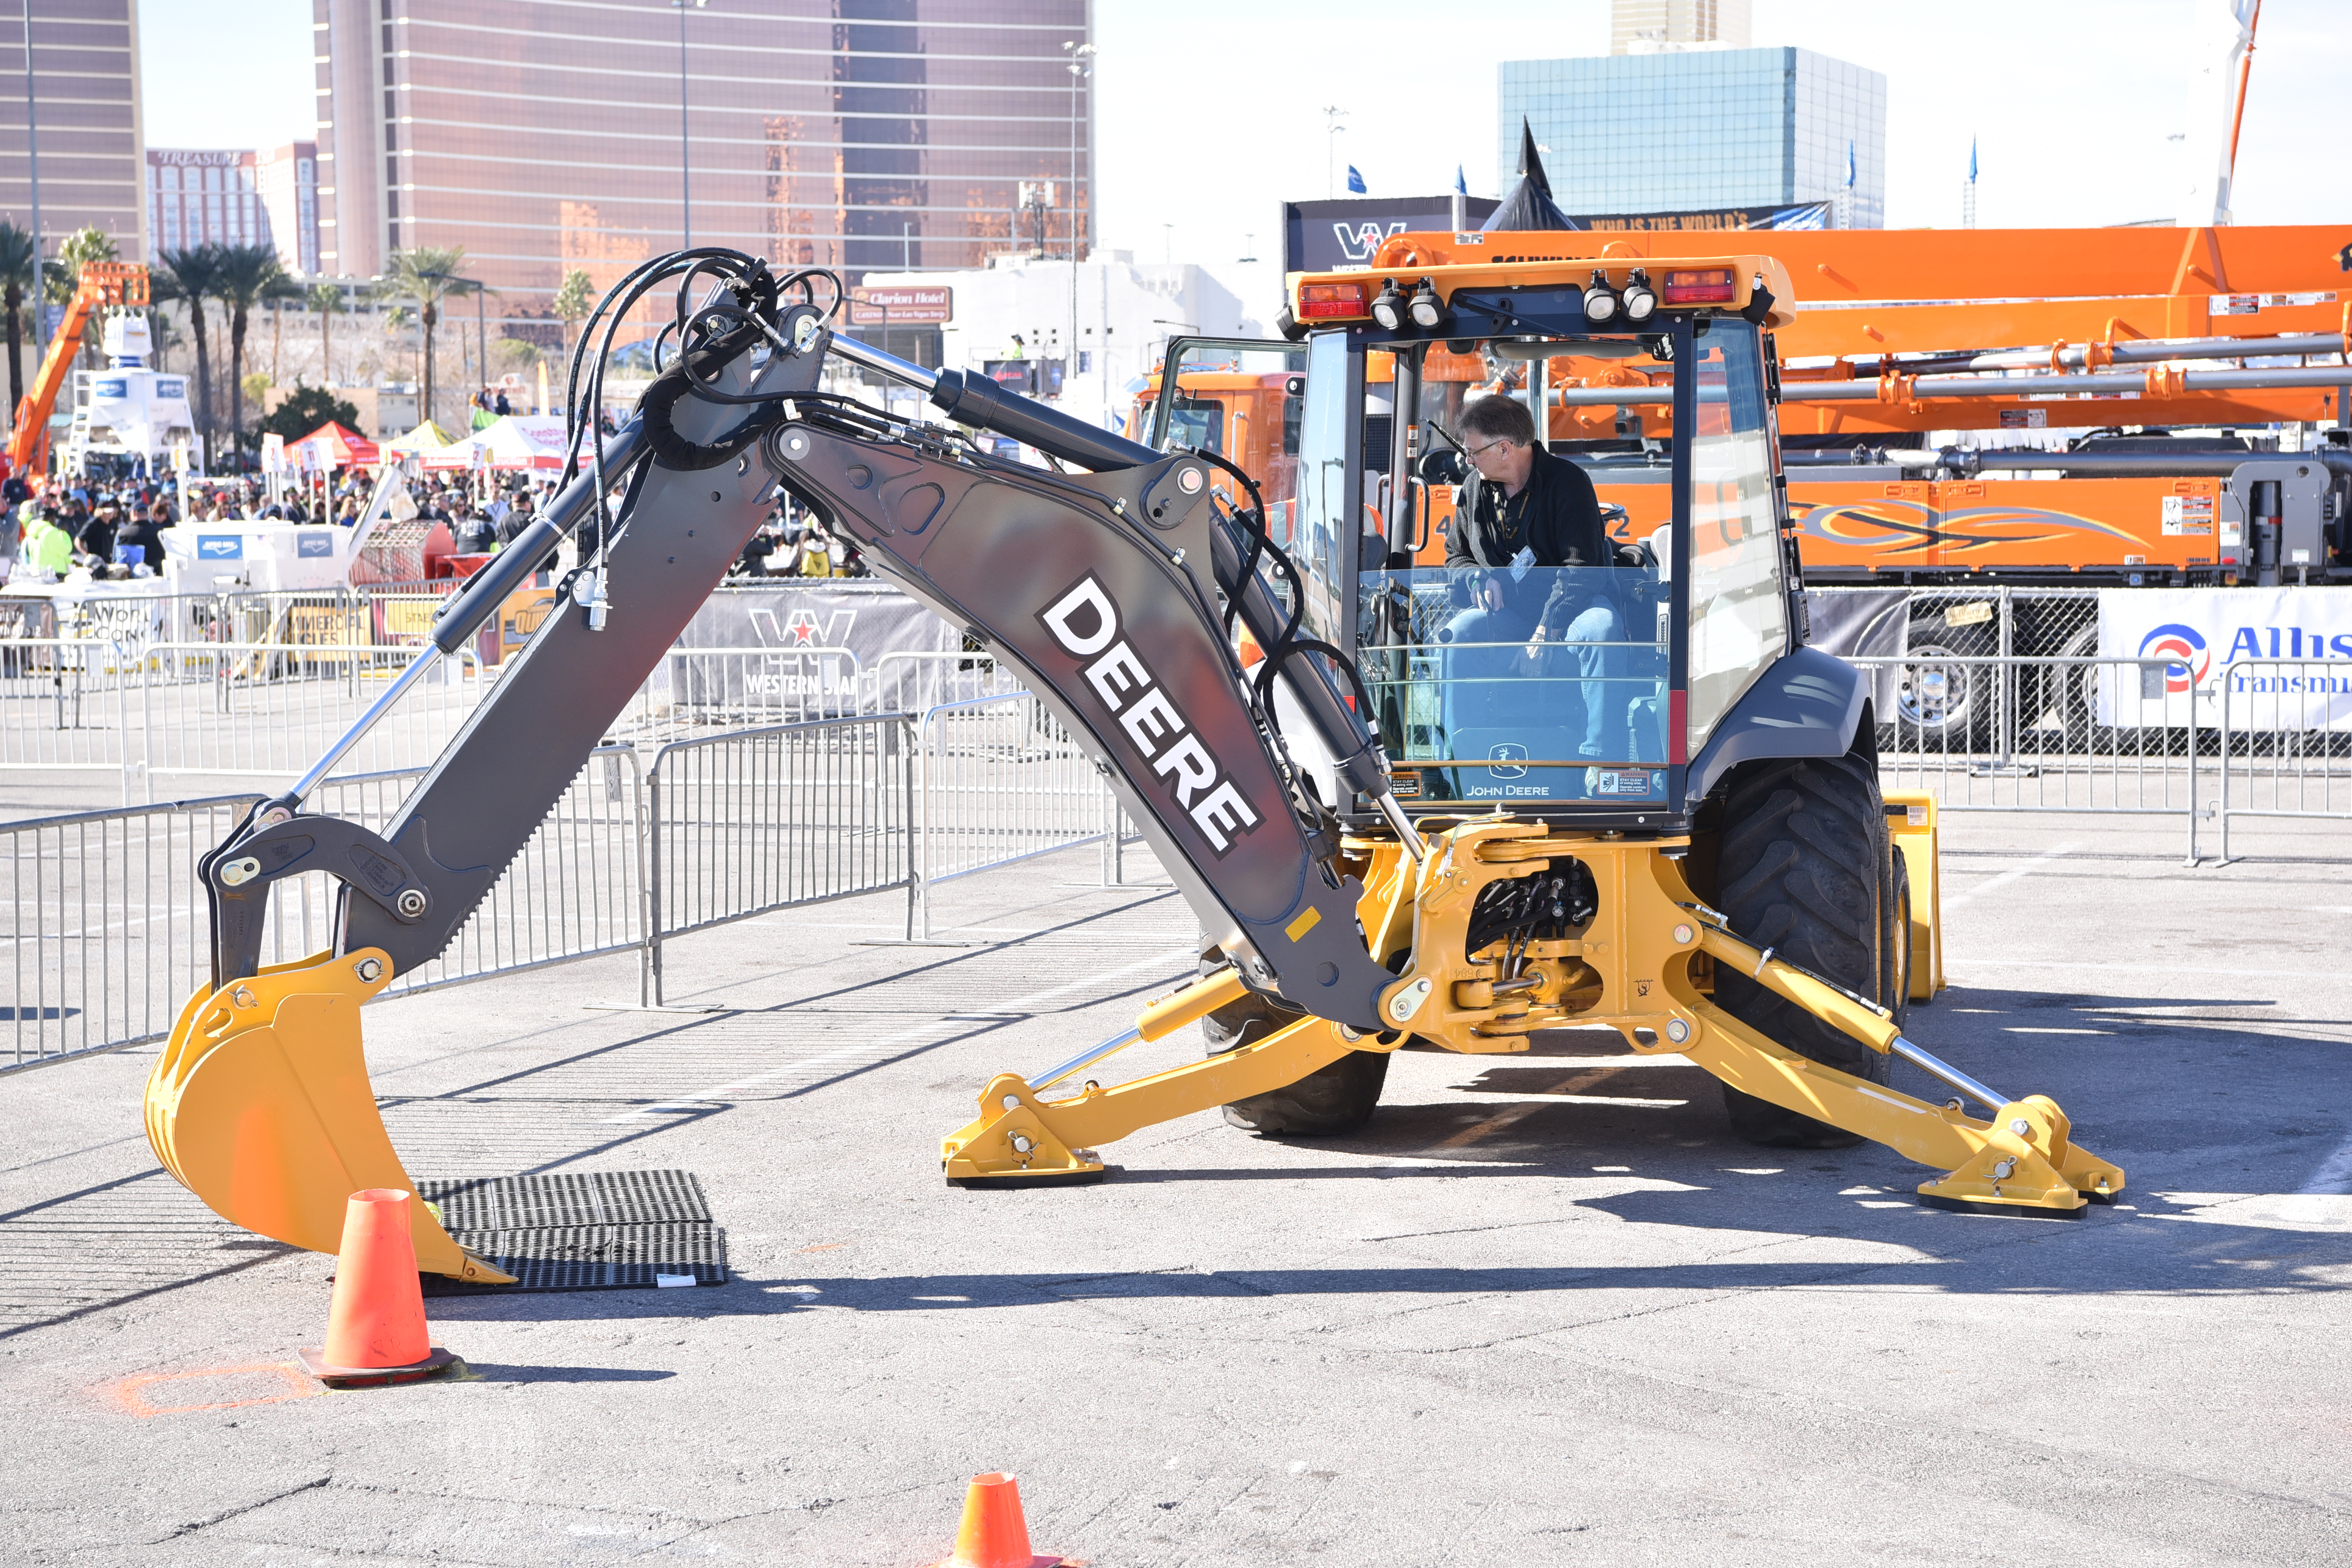 World of Concrete 2019 Show Information